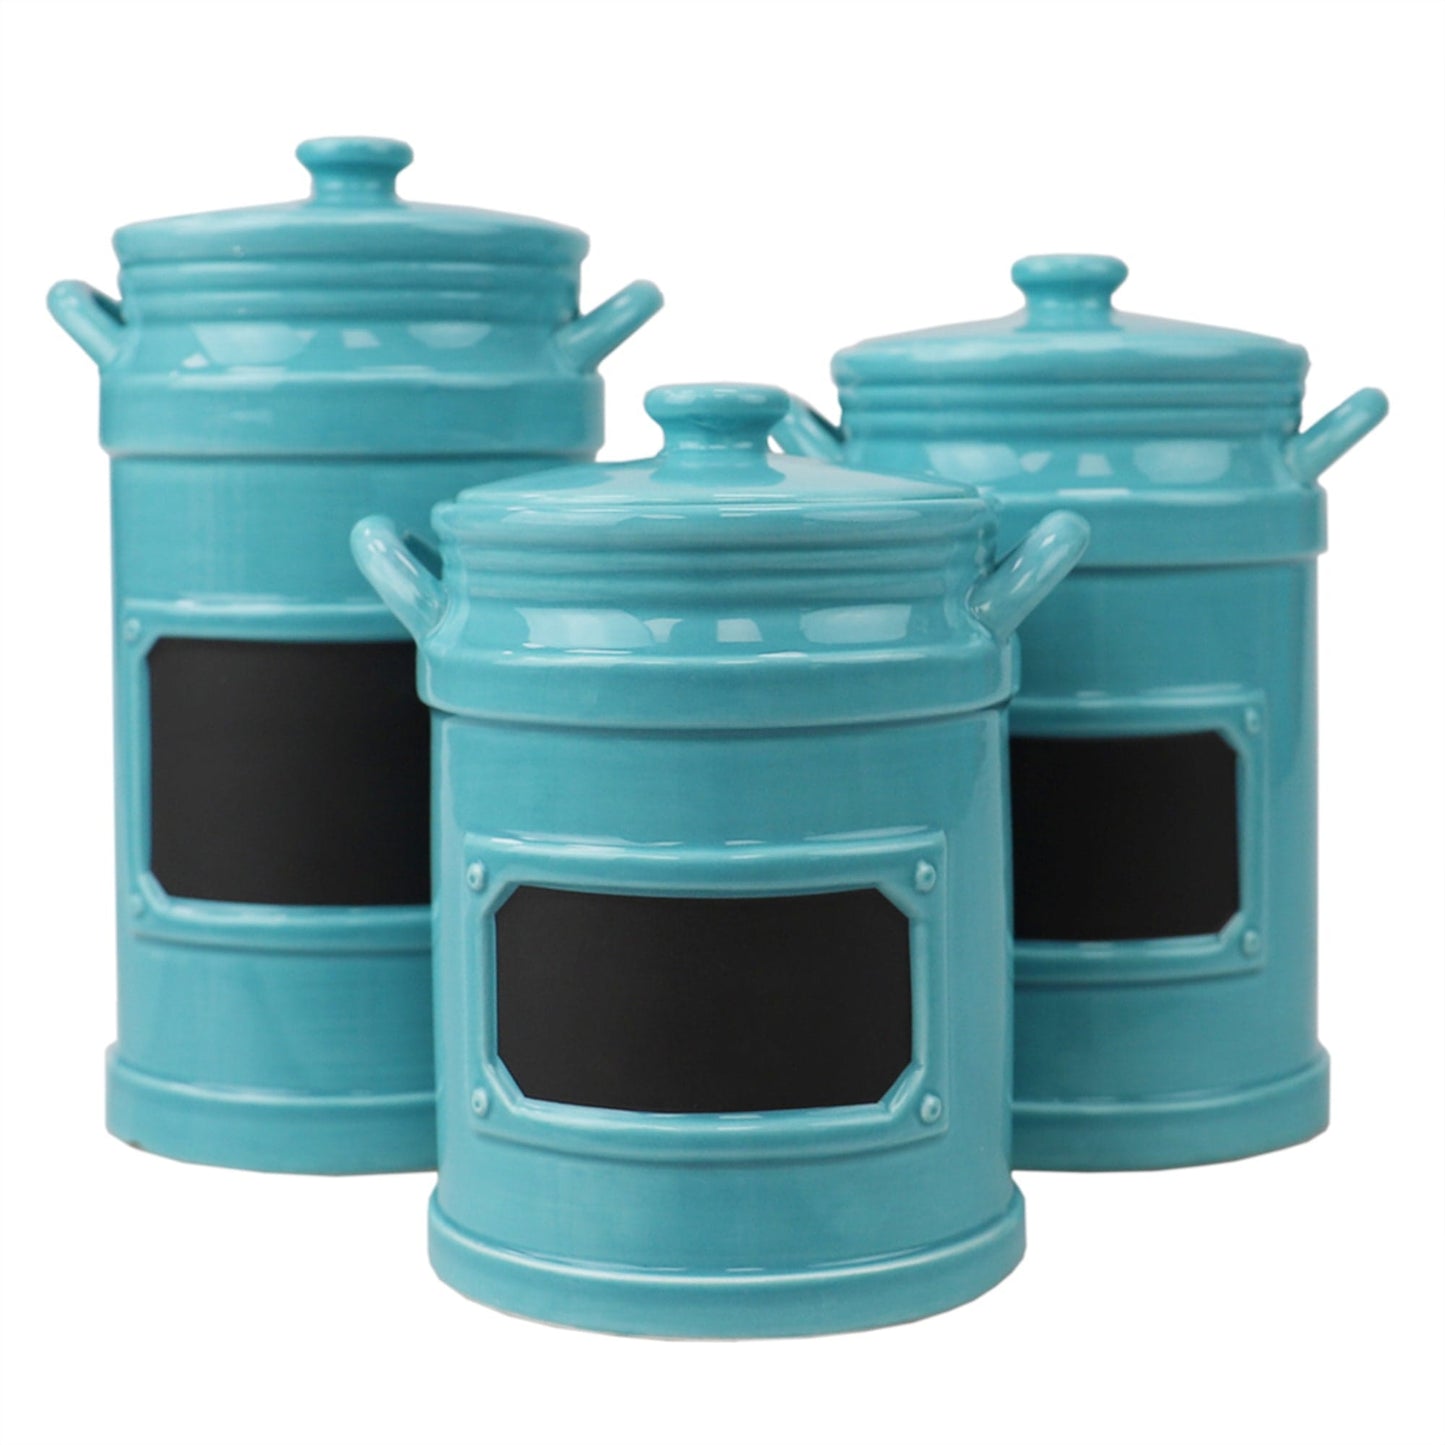 3 Piece Ceramic Canisters with Chalkboard Labels, Turquoise